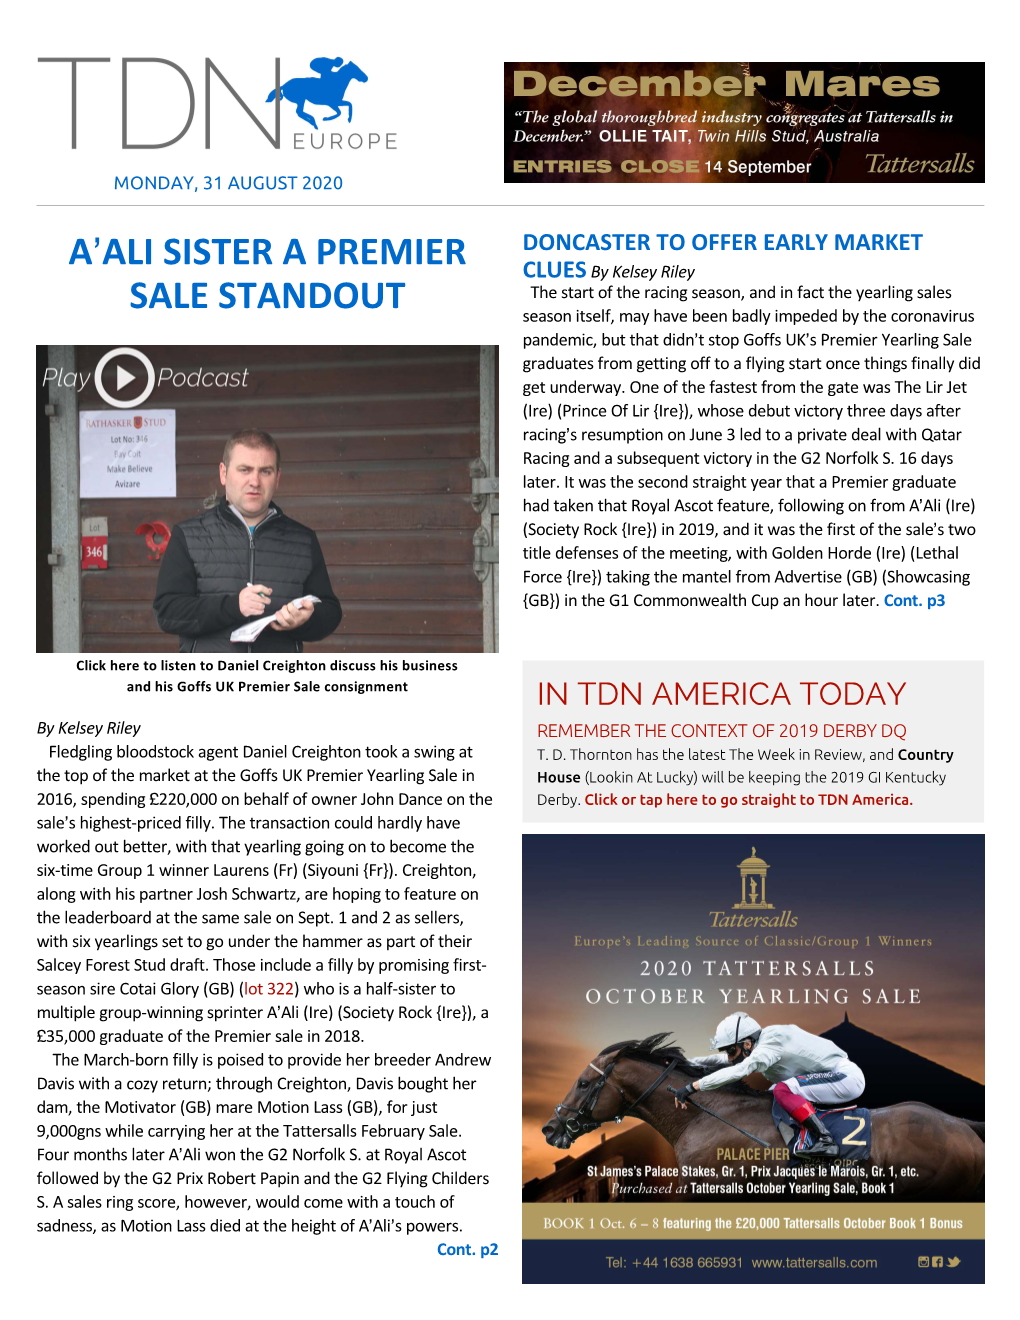 Tdn Europe • Page 2 of 20 • Thetdn.Com Monday • 31 August 2020